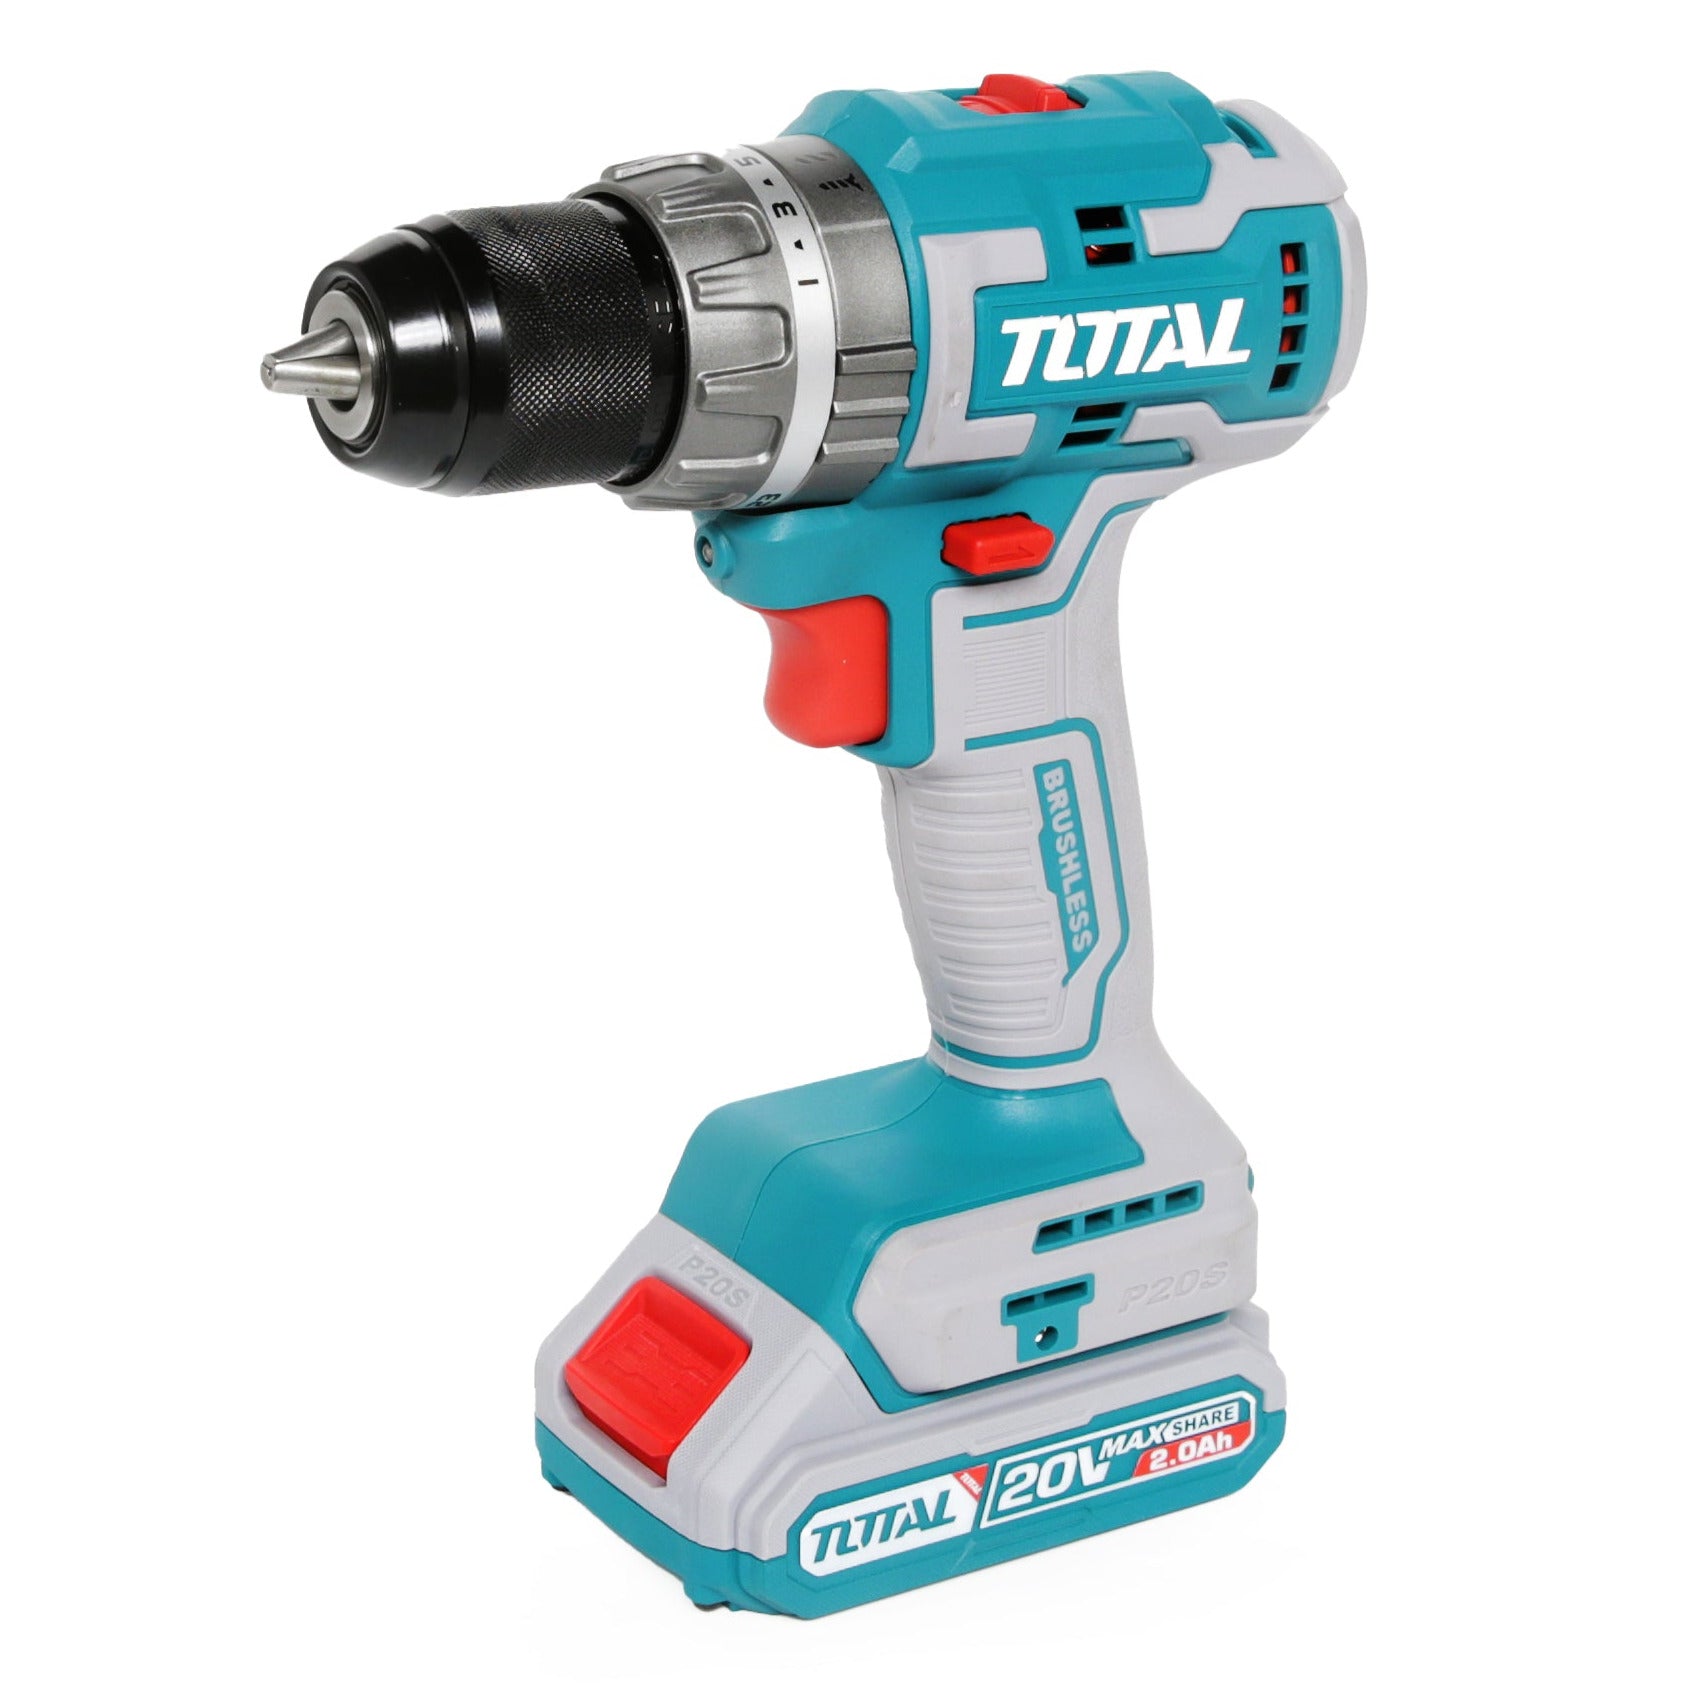 Total Li-Ion 20V Brushless Impact Drill (with 2 x Batteries & Charger) - TIDLI20605